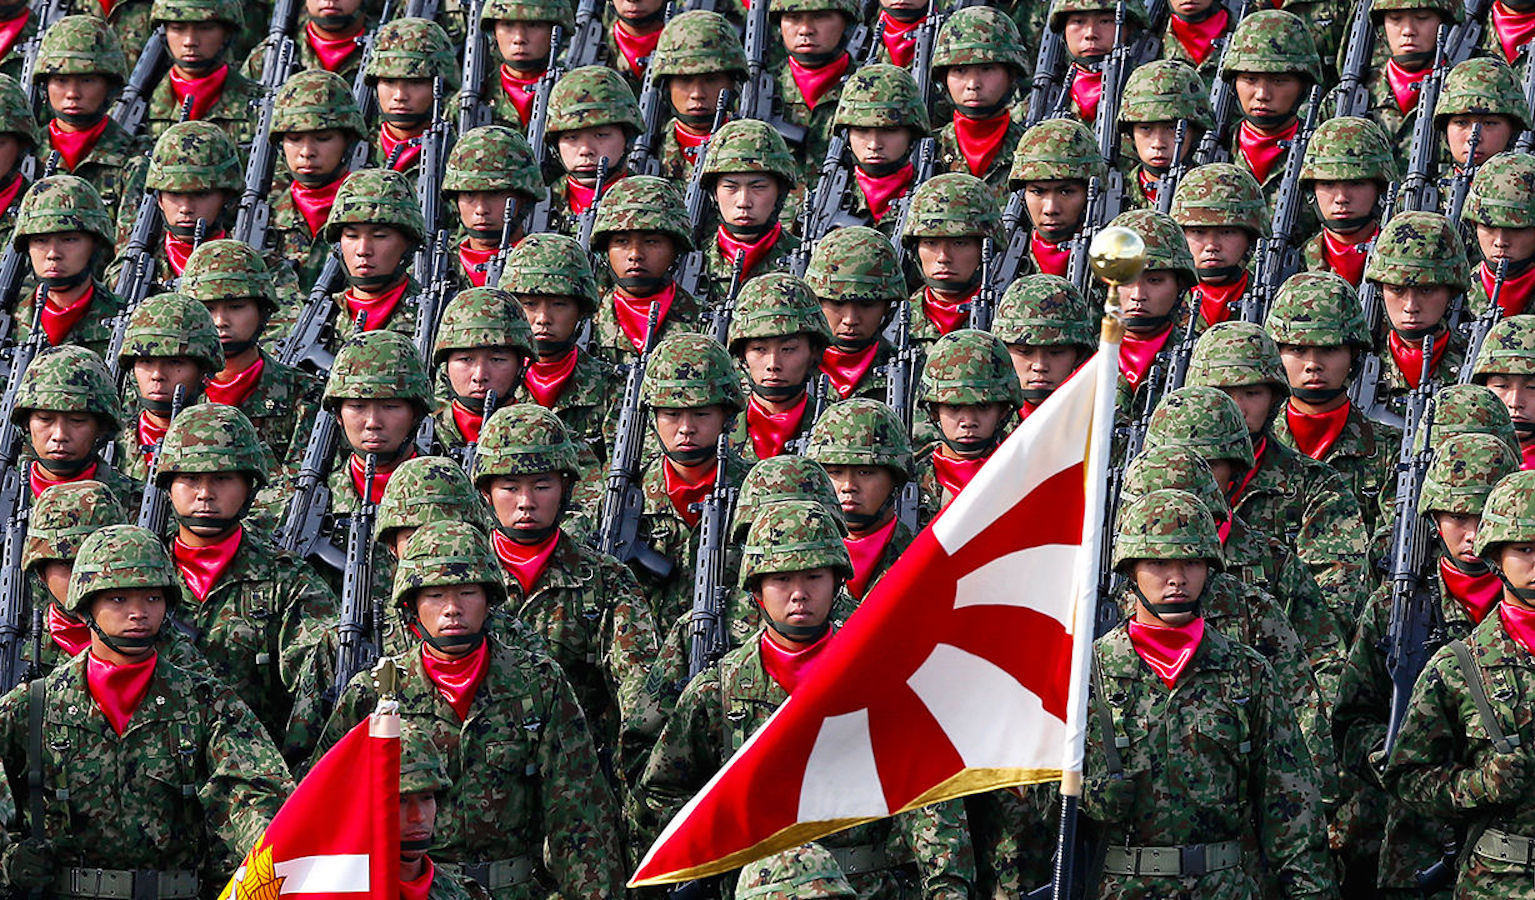 Japan to counter China's growing military power, sets record 52